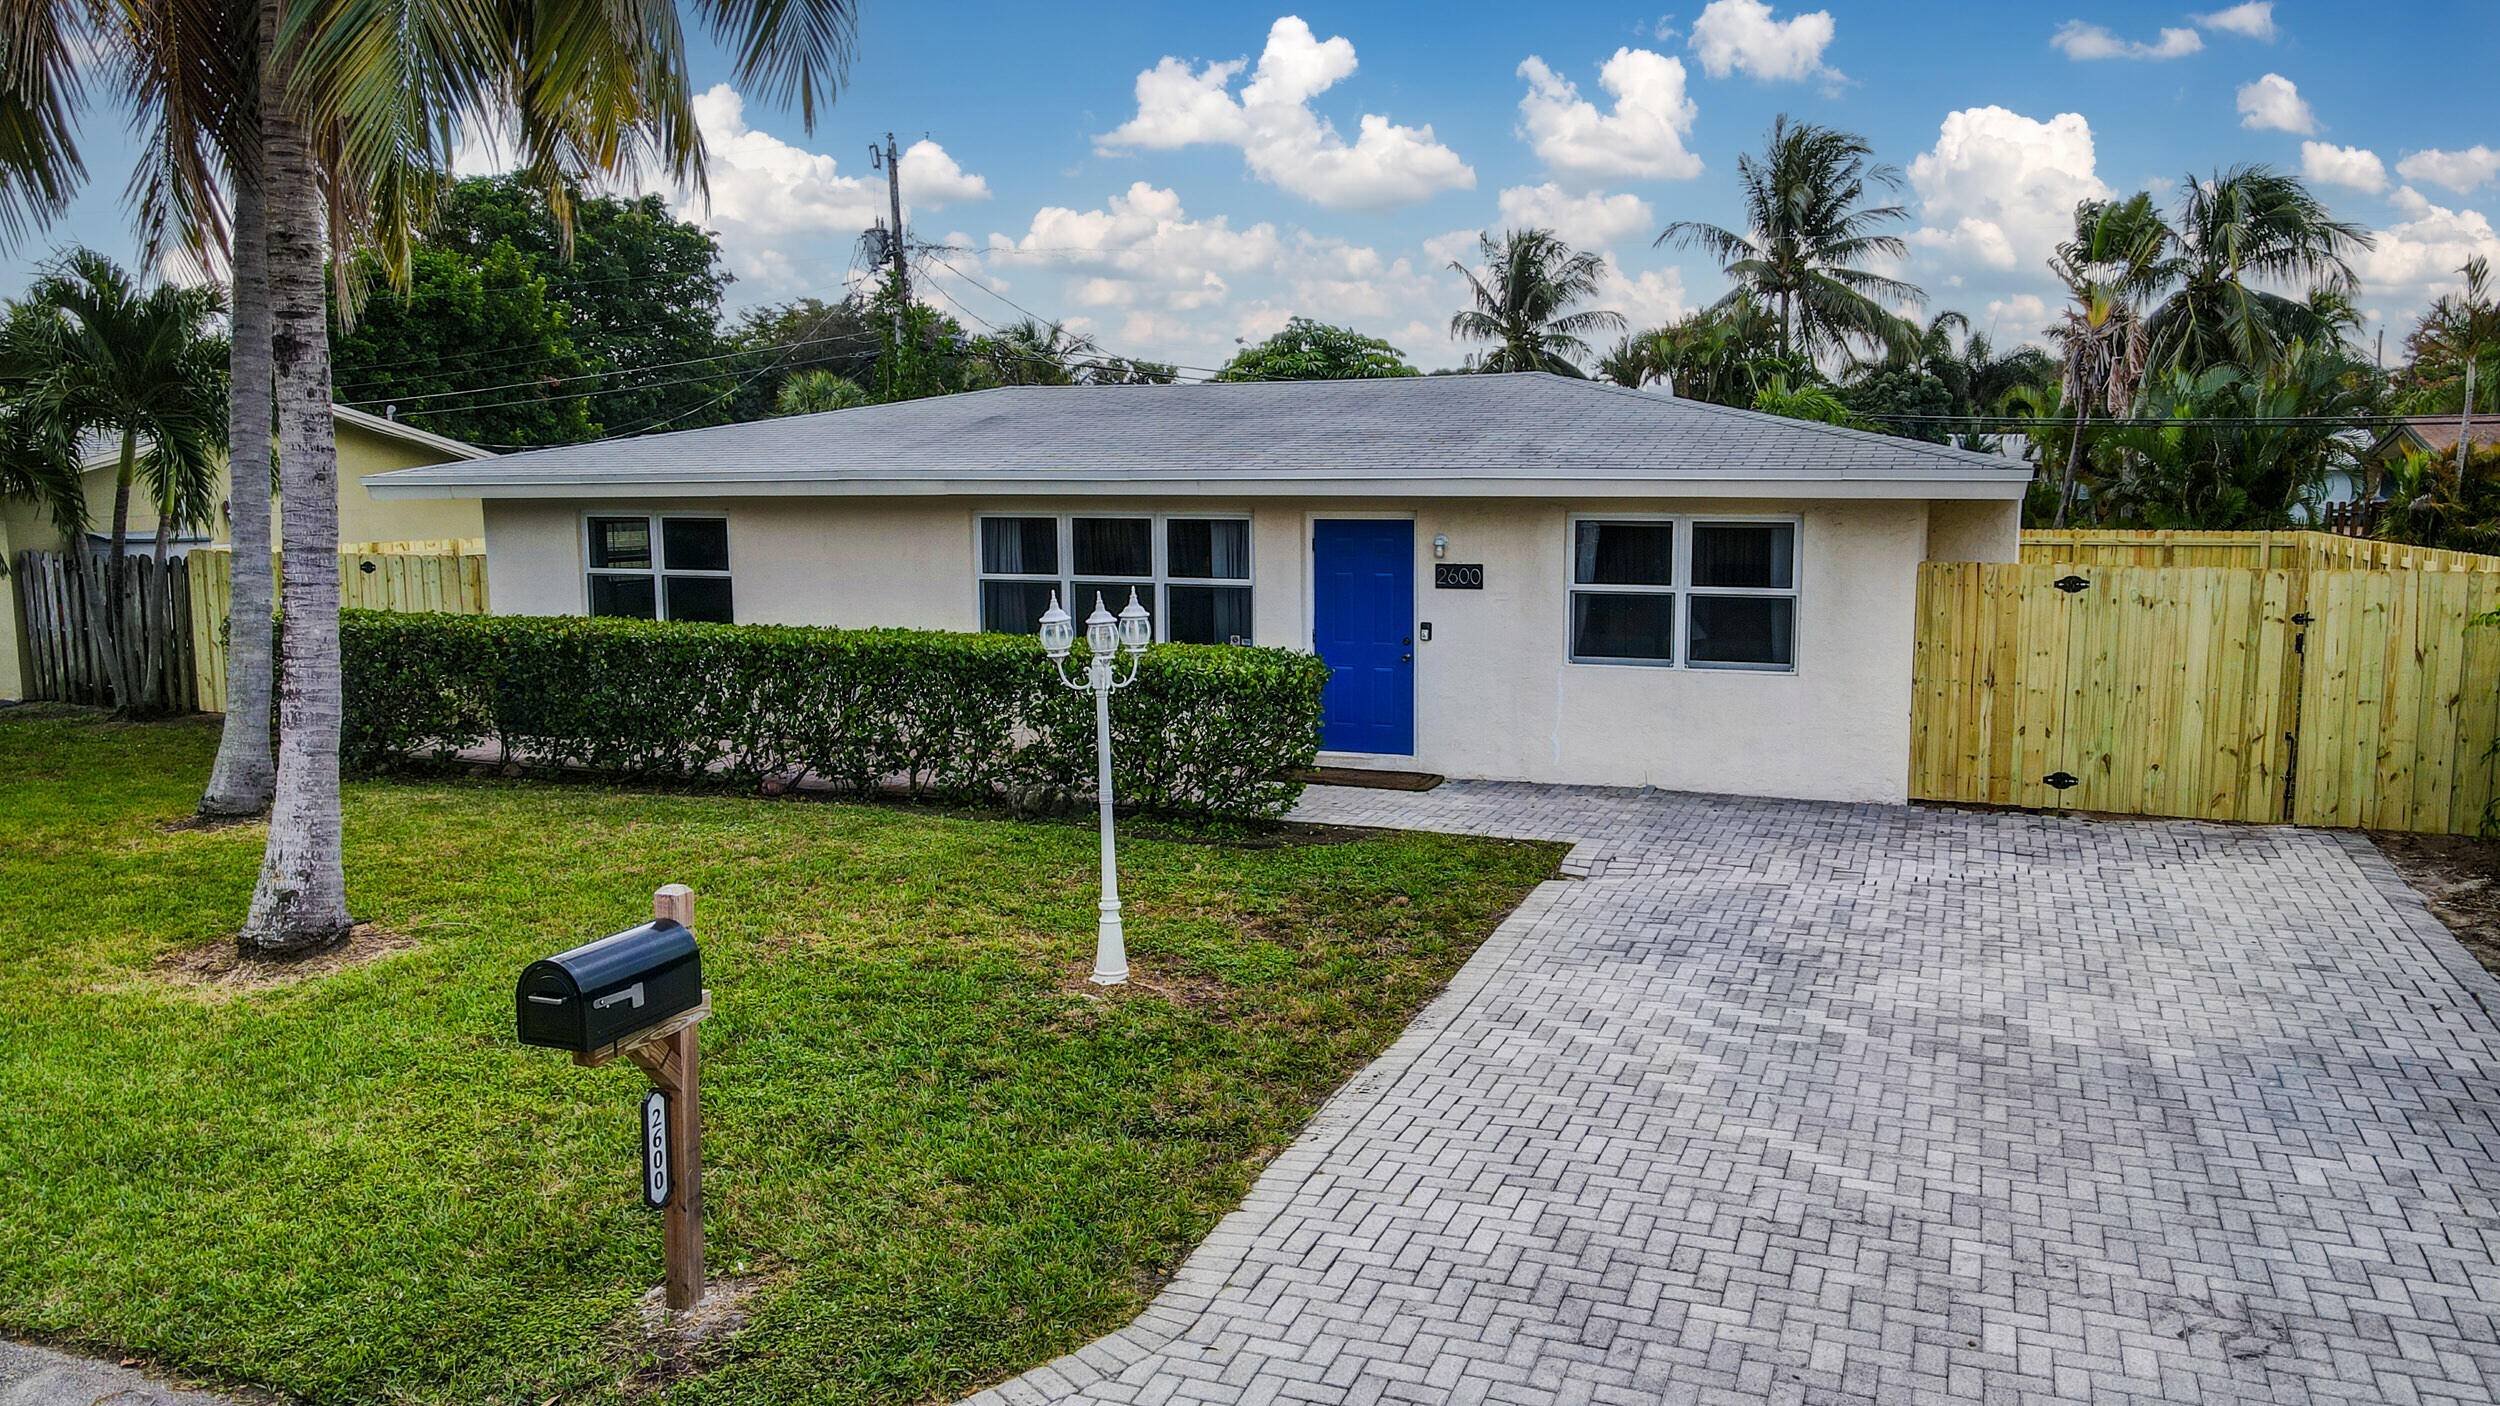 This fantastic East Pompano home is situated east of US1, offering an excellent location near beaches, nightlife, restaurants, and two golf courses.